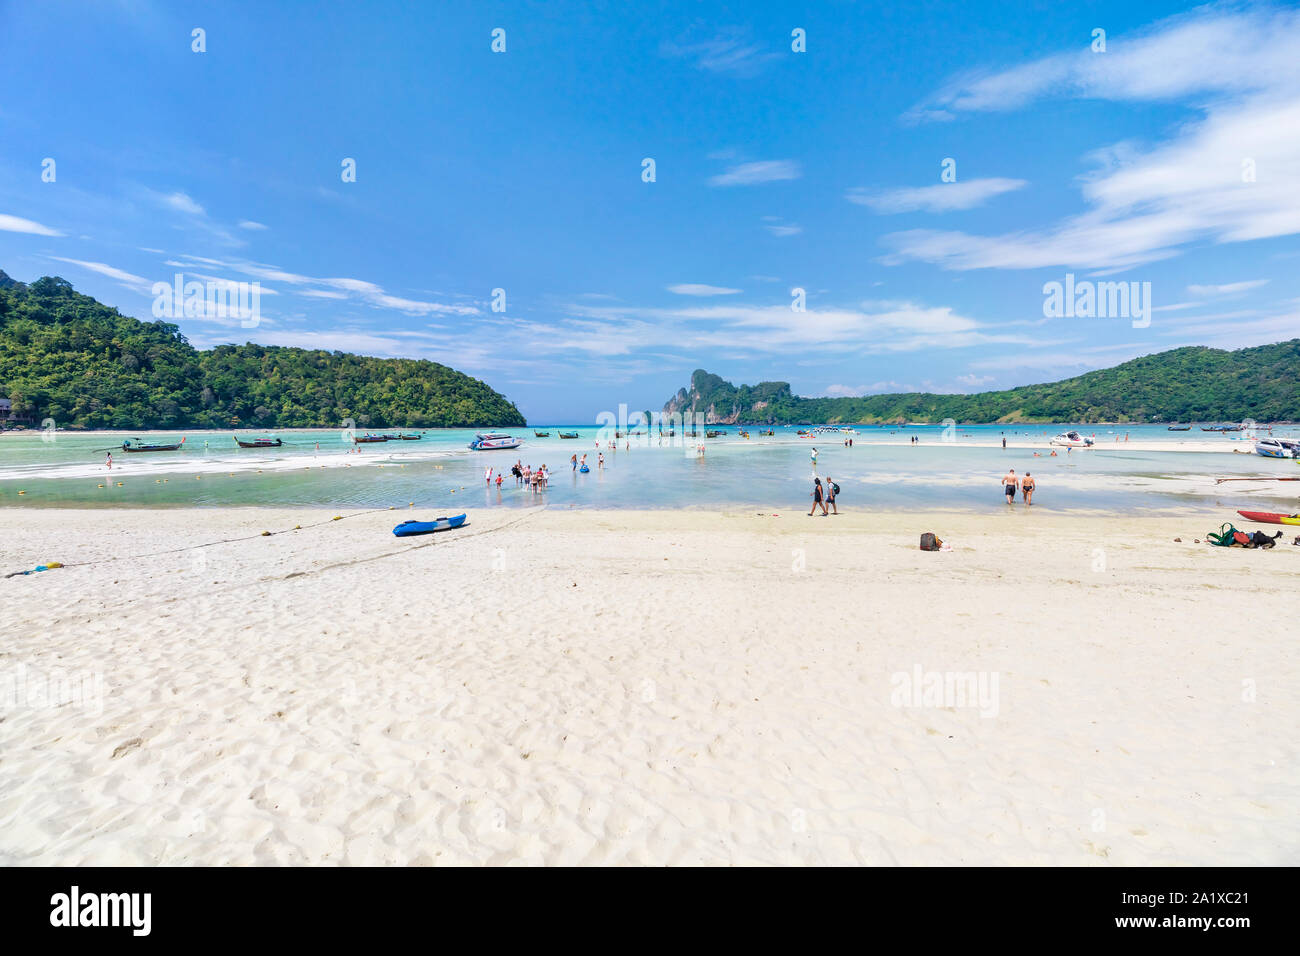 Asian tropical Loh Dalum beach paradise in Thailand with boats and people Stock Photo